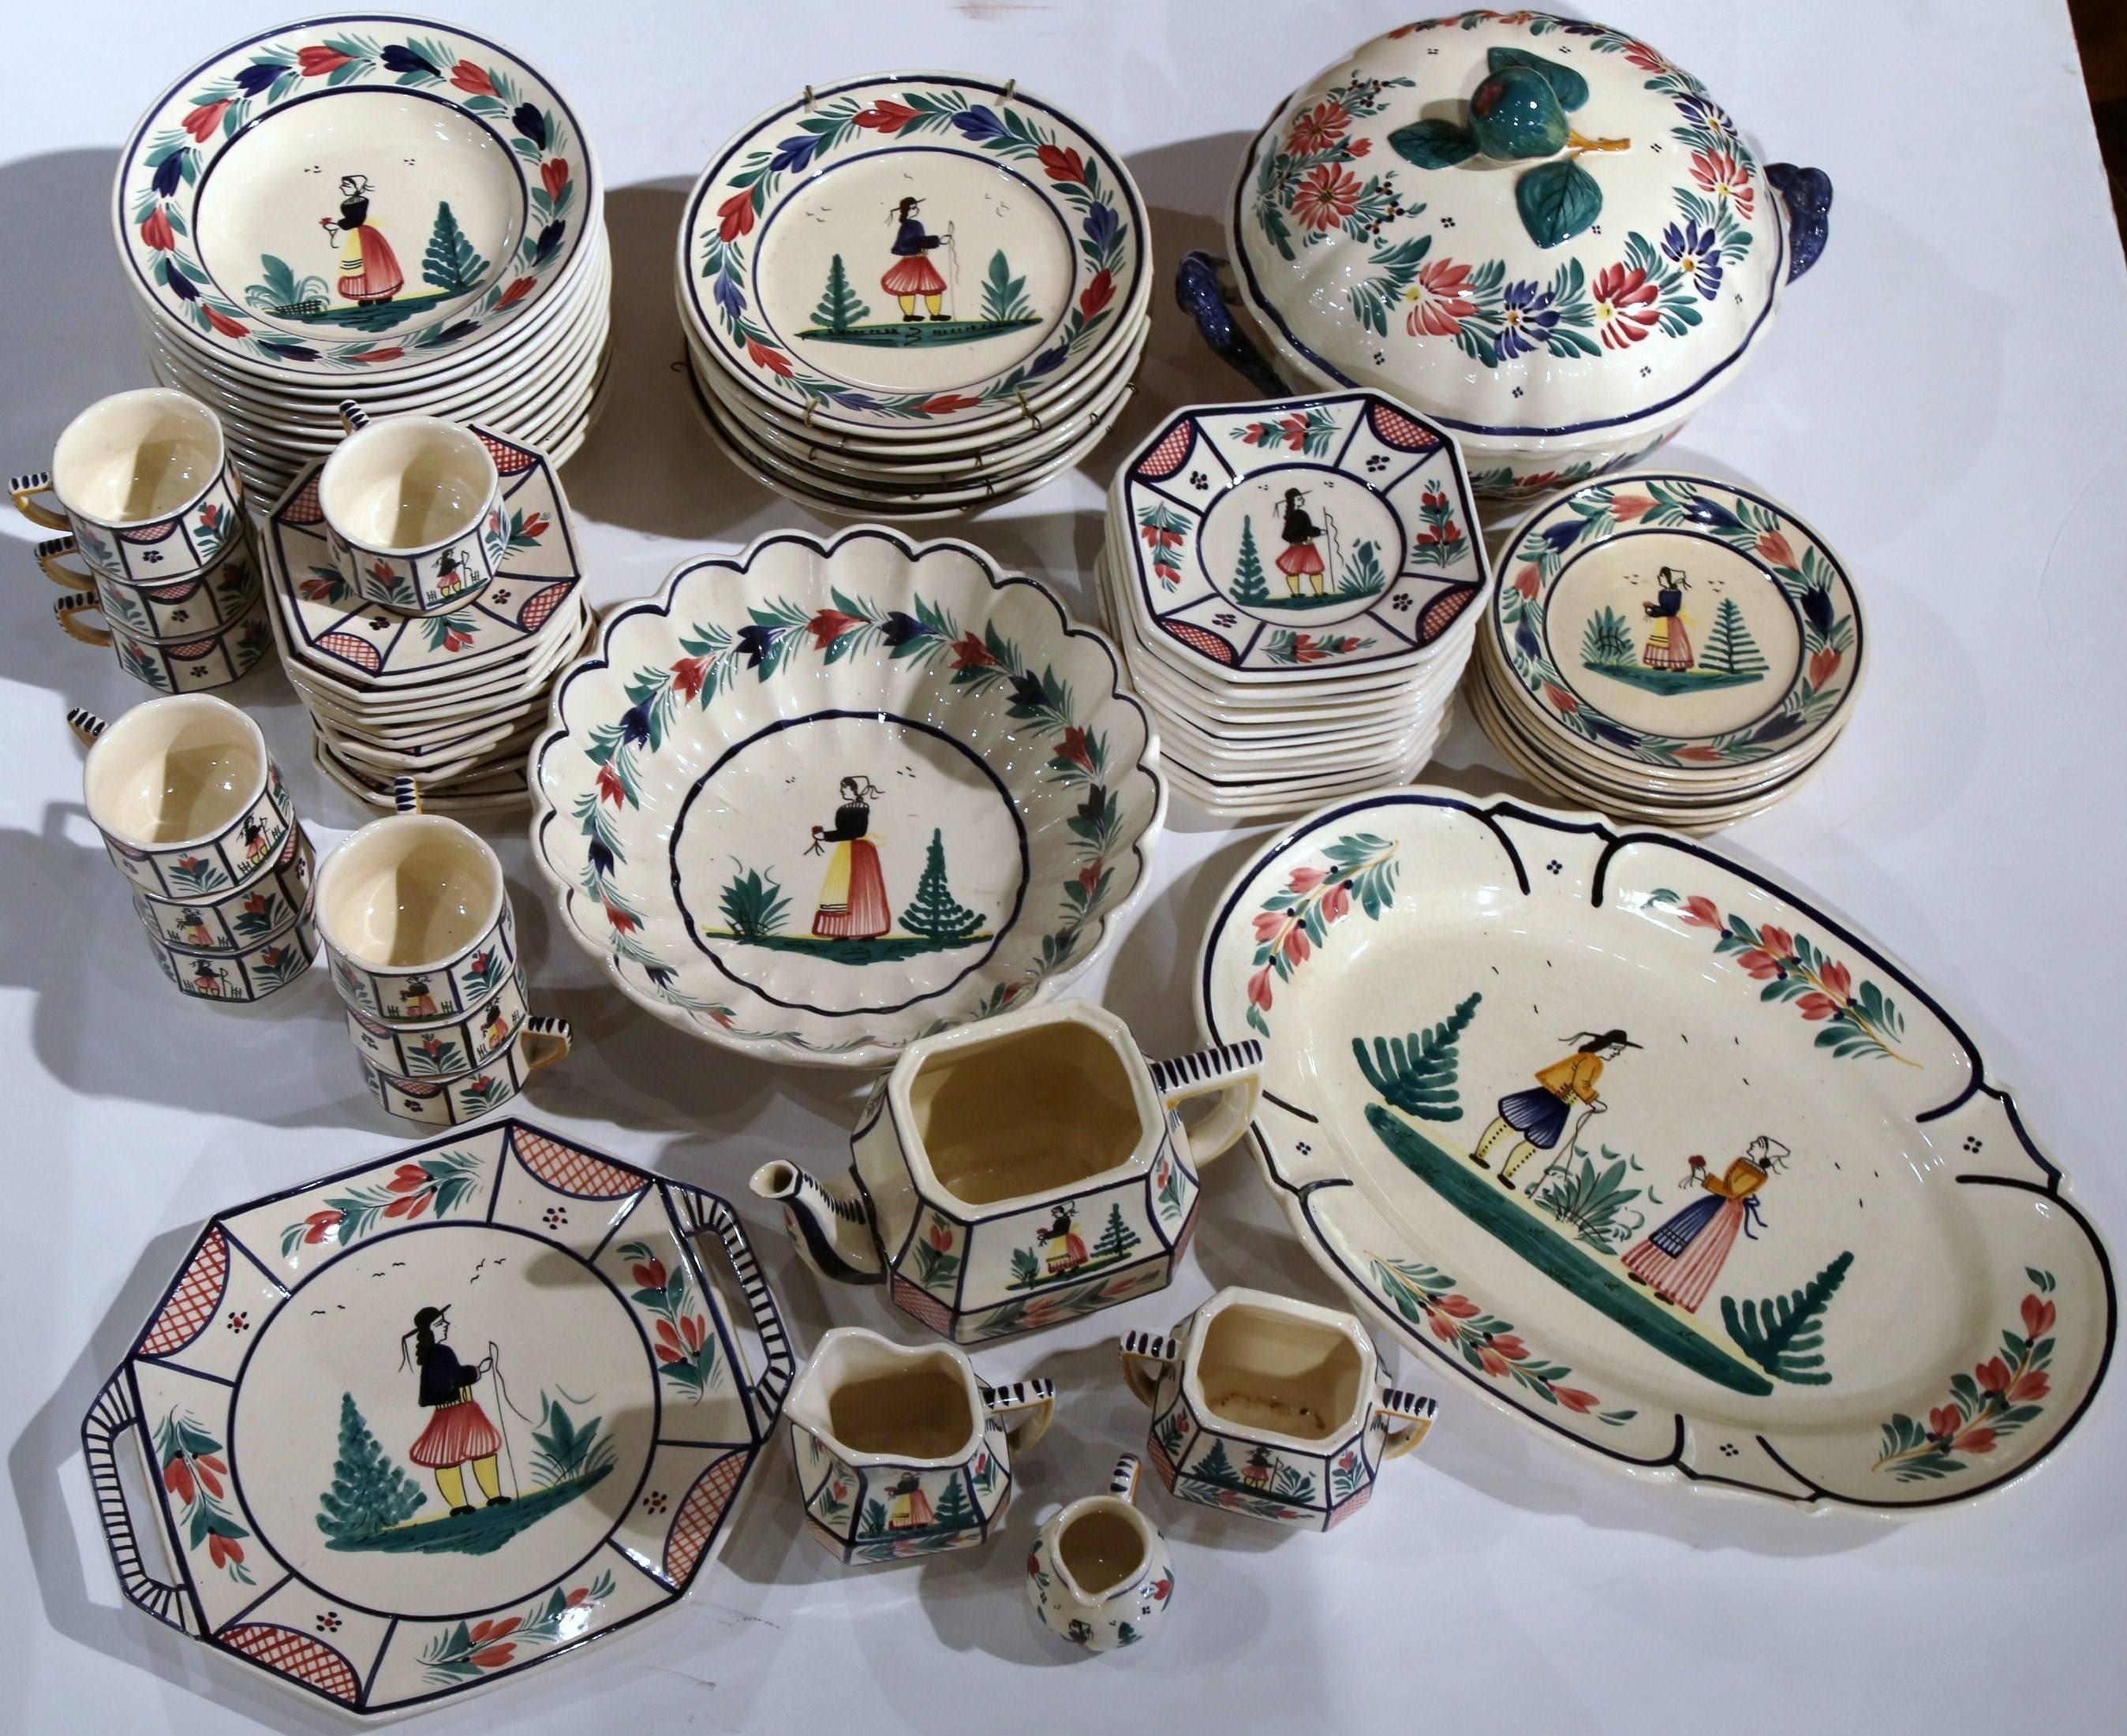 These colorful, antique dishes were crafted in Quimper, France circa 1880. The set is about 70 items total and includes plates, coffee mugs, a serving tray, a soup tureen, and more. The set is a refined addition to your dining table, and is just as